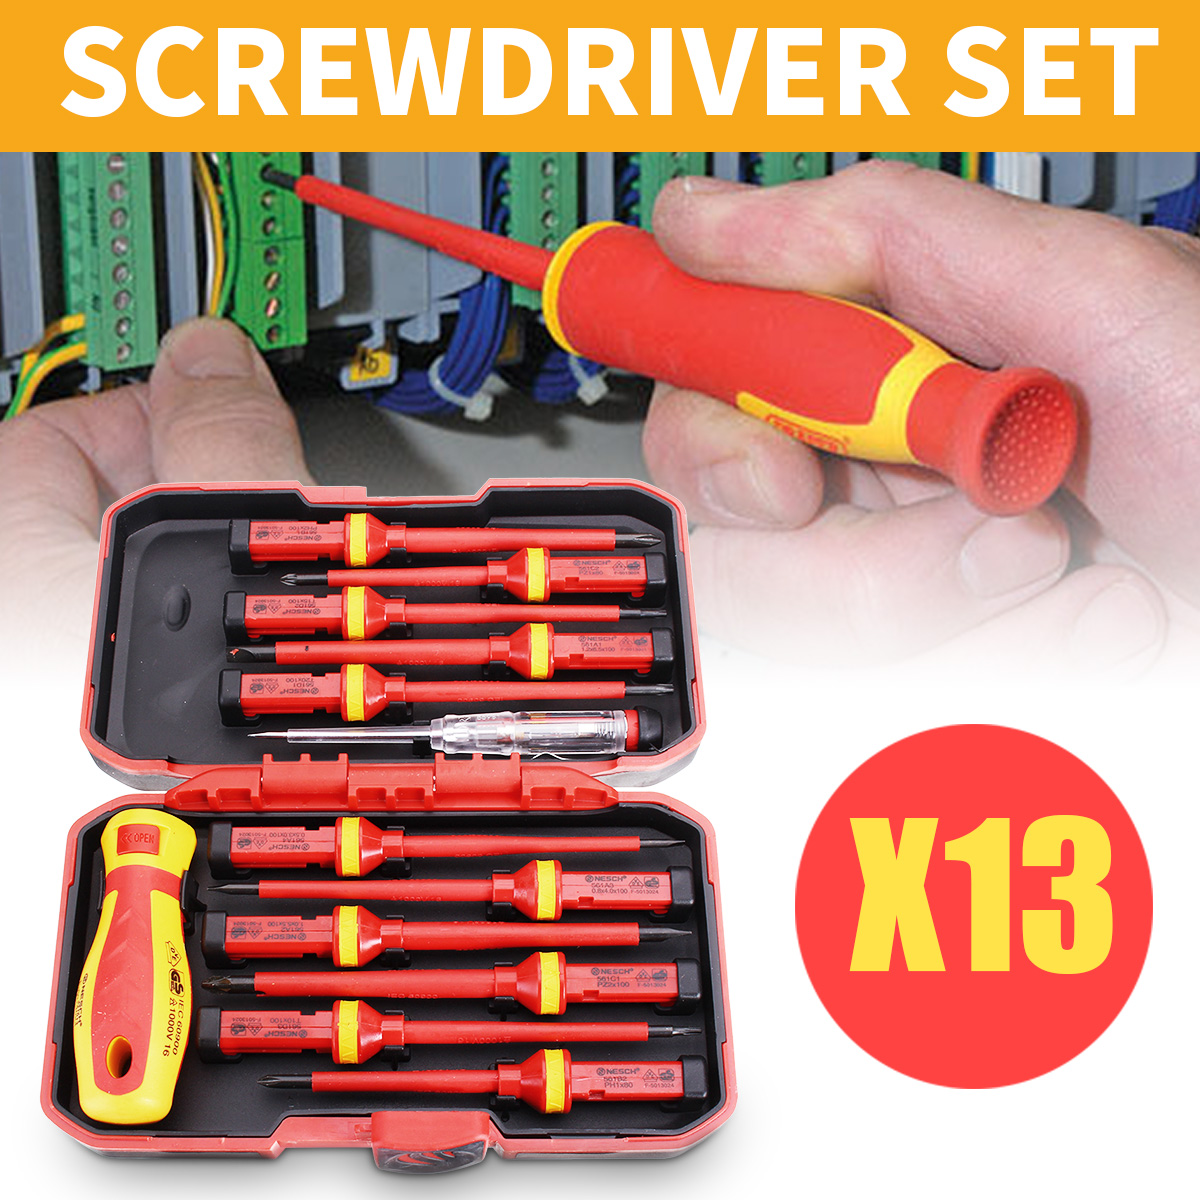 13Pcs 1000V Electronic Insulated Screwdriver Set Phillips Slotted Torx CR-V Screwdriver Repair Tools 63